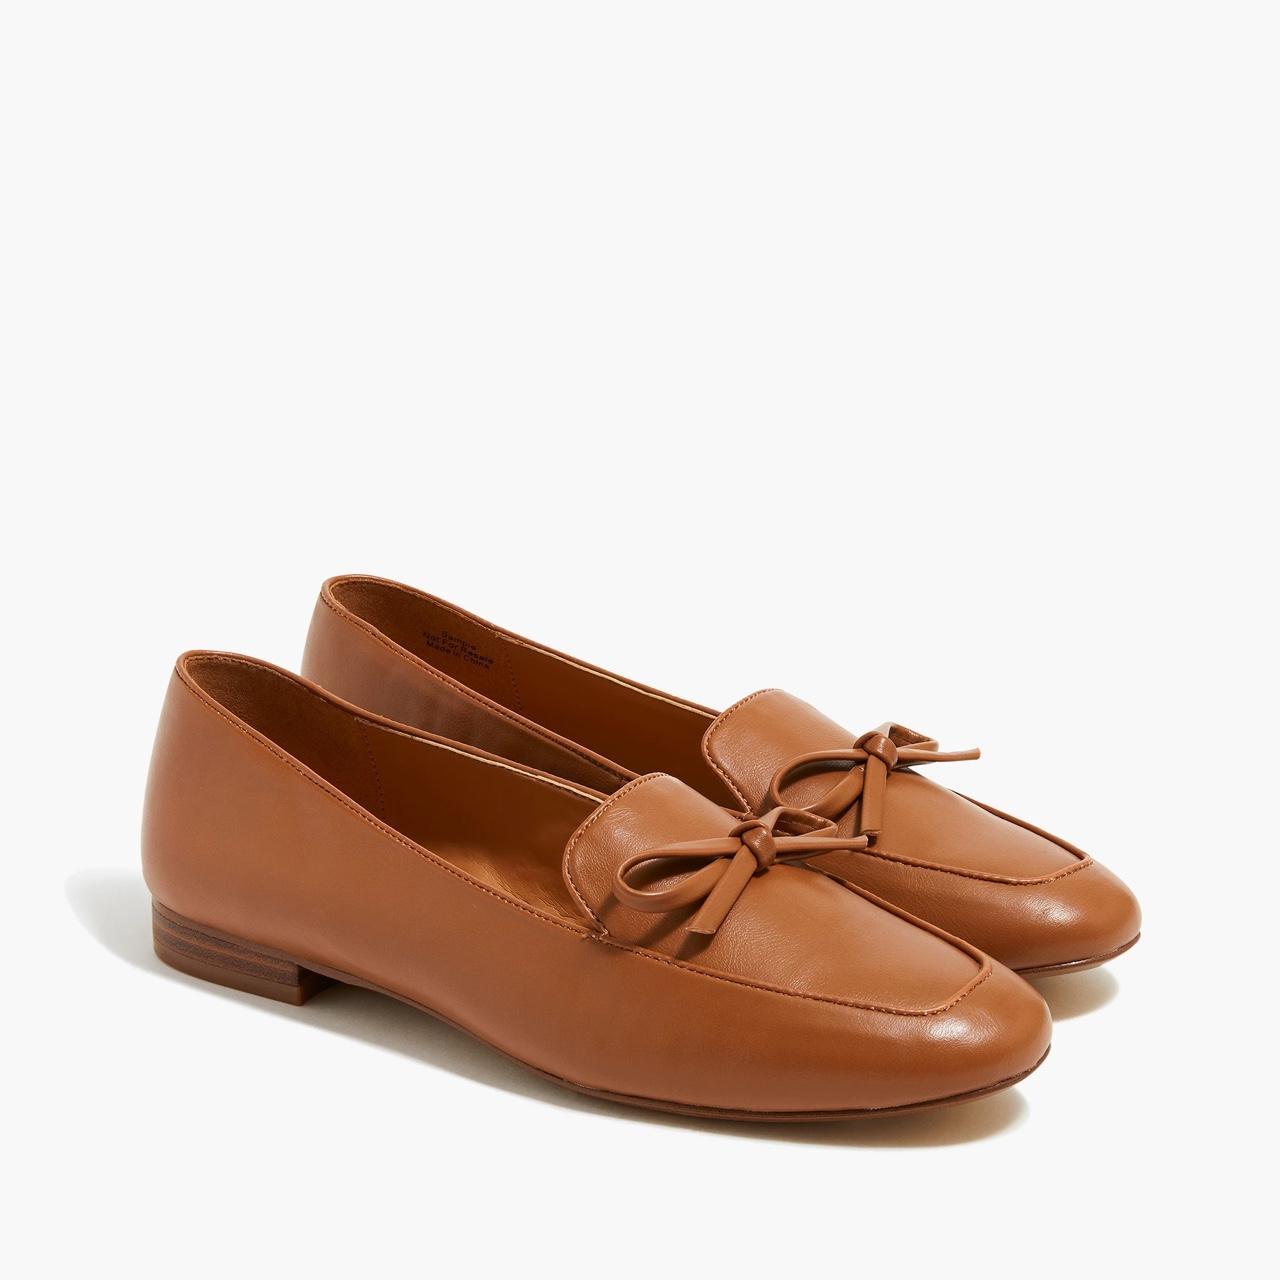 J.Crew Women's Tan and Brown Loafers (2)